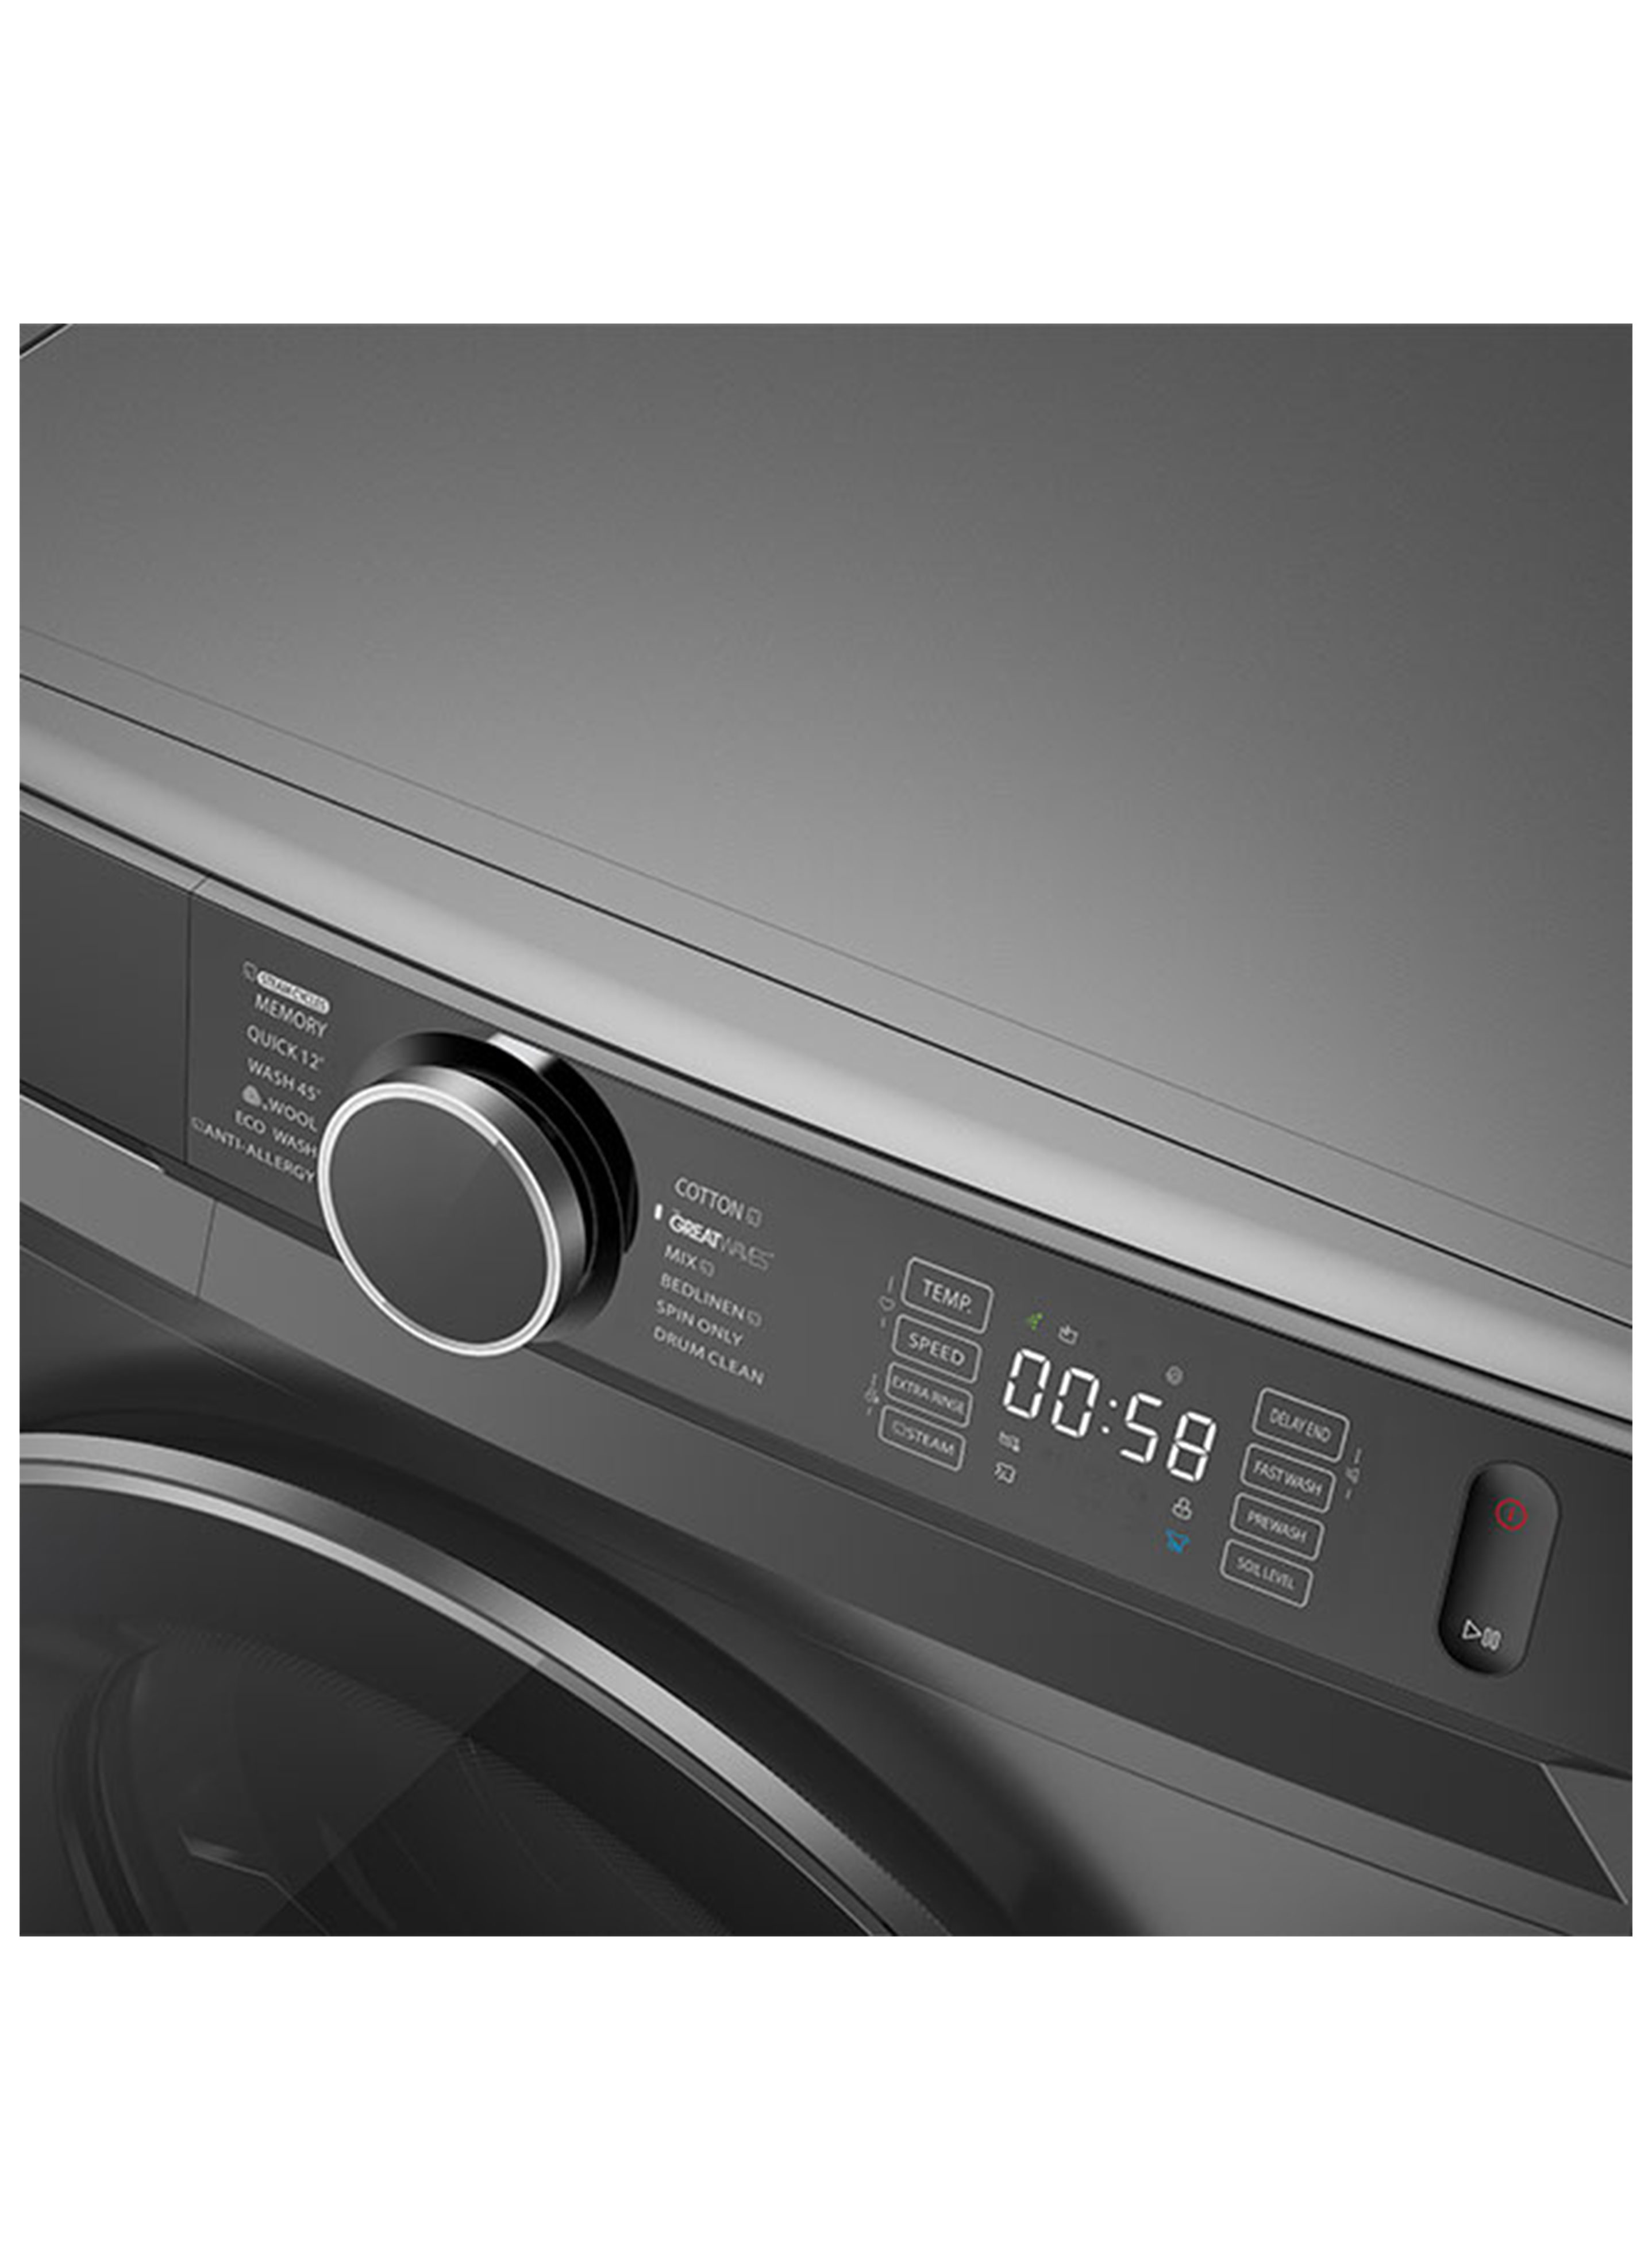 9 KG, THE GREATWAVES WASHING MACHINE WITH STEAM & ULTRA FINE BUBBLE (UFB)